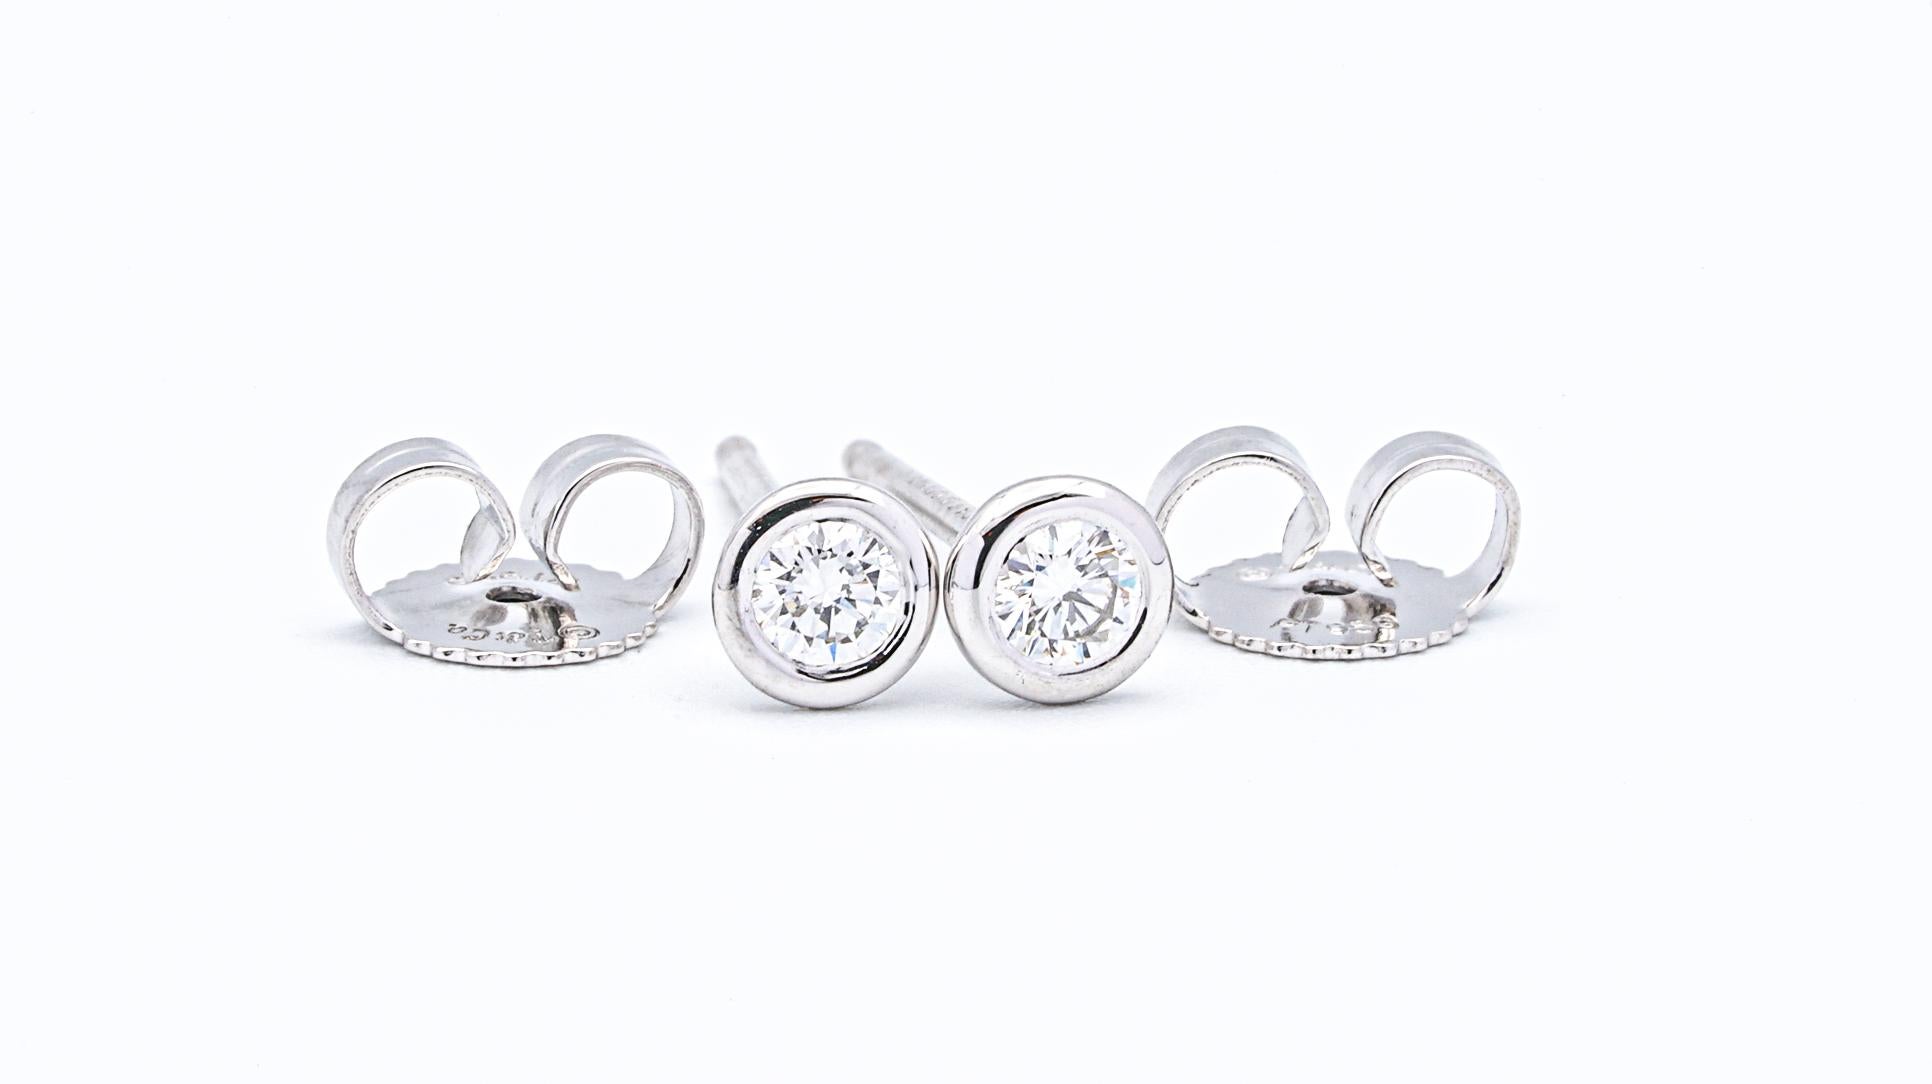 Tiffany and Co. stud earrings by Elsa  Peretti finely crafted in platinum with 2 round brilliant bezel-set diamonds weighing 0.20 cts total weight.  Pushbacks.

Stamp: T&Co.,Peretti, PT950

Free overnight delivery is available for this item.  Please